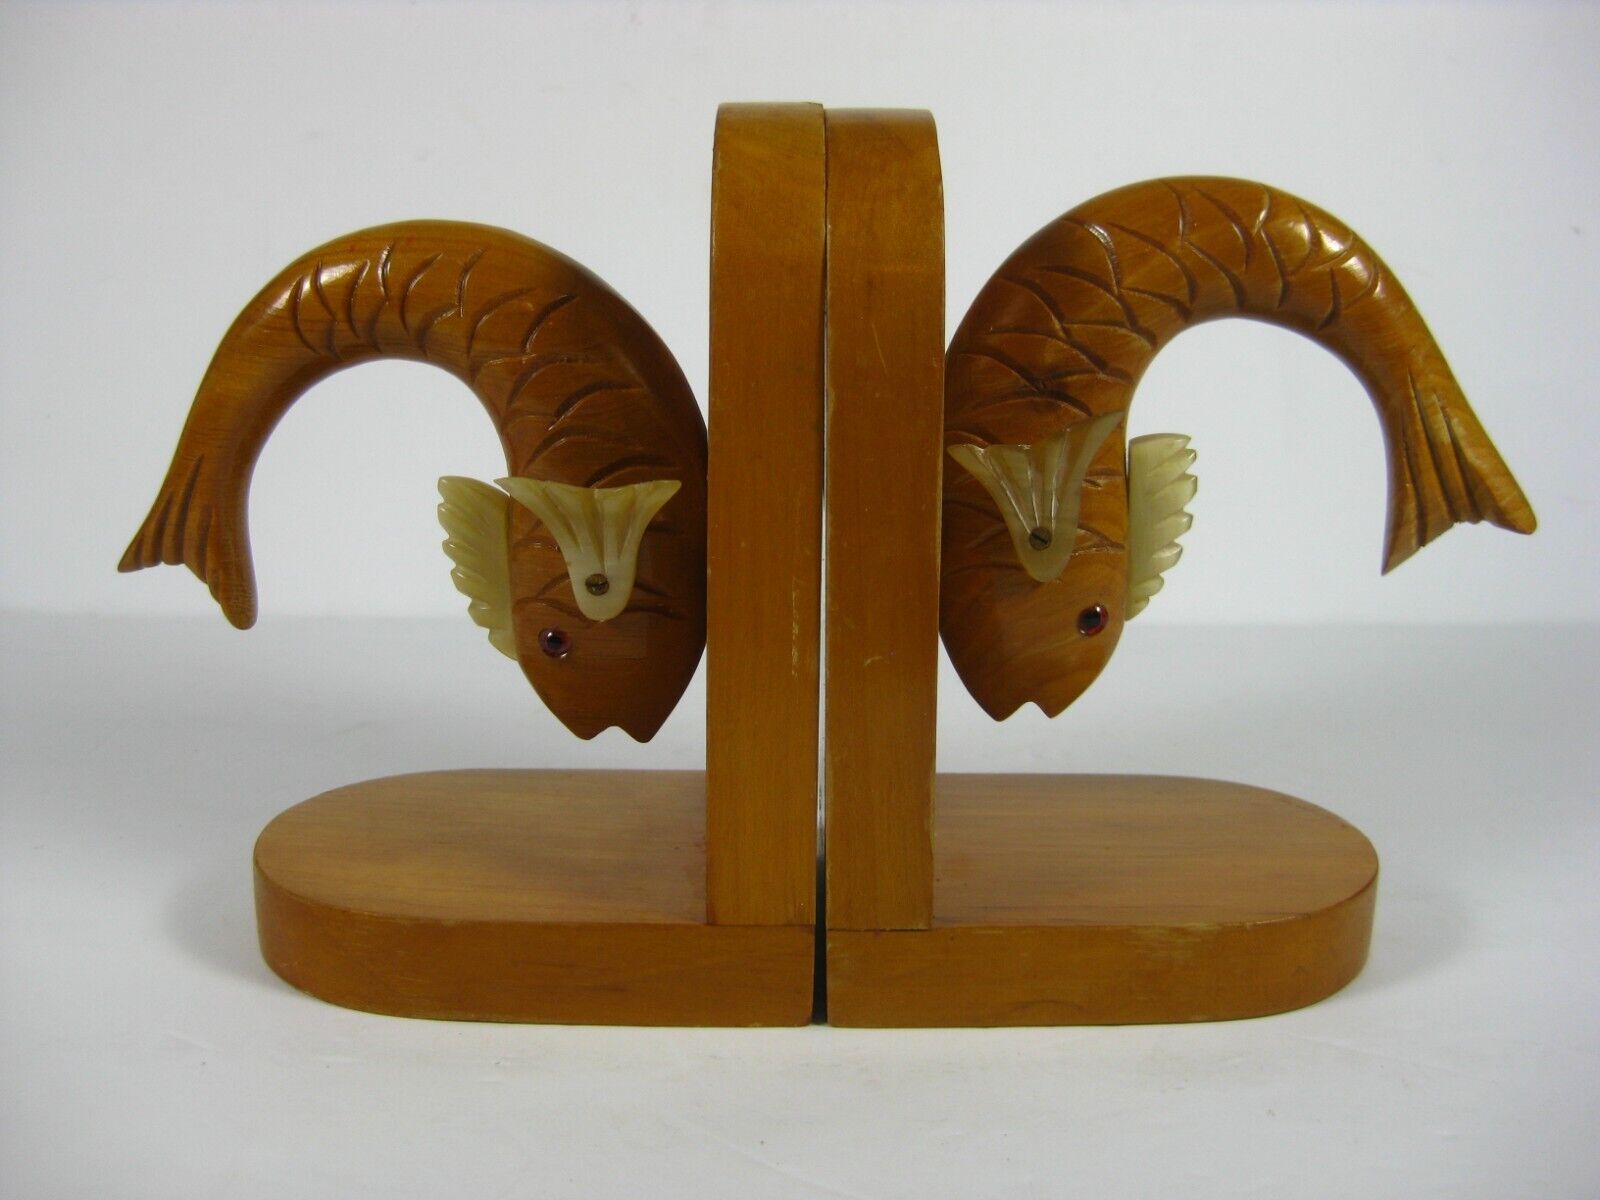 Vintage signed Carved Wood Koi Carp Fish Bookends with carved shell-like Fins